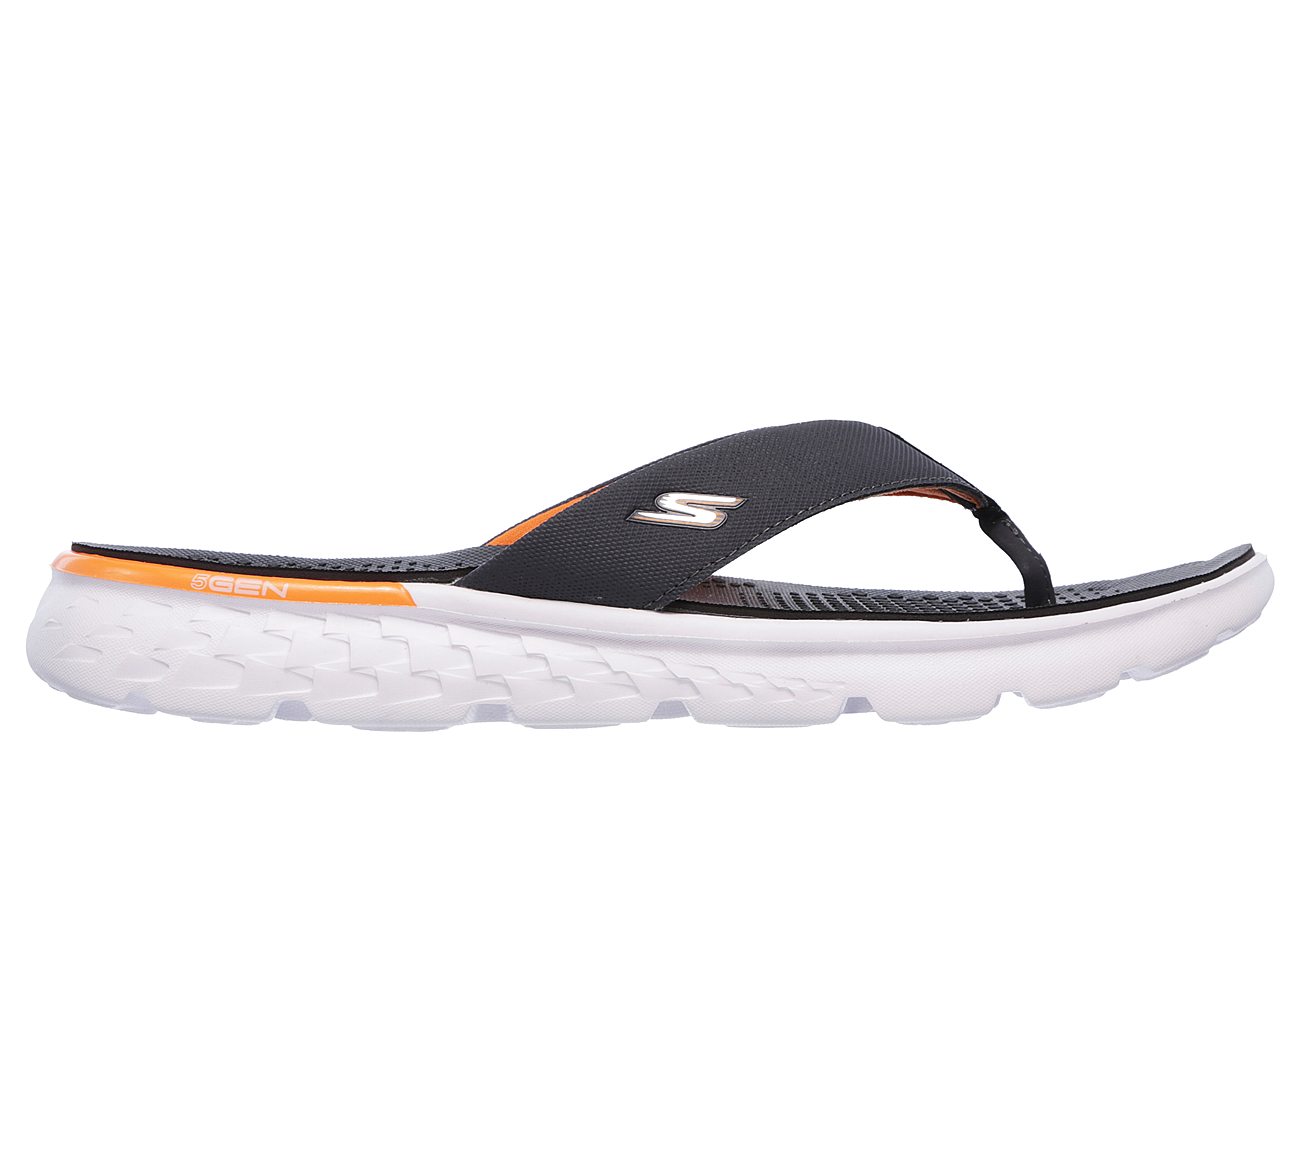 ON-THE-GO 400 - SHORE, CHARCOAL/ORANGE Footwear Right View